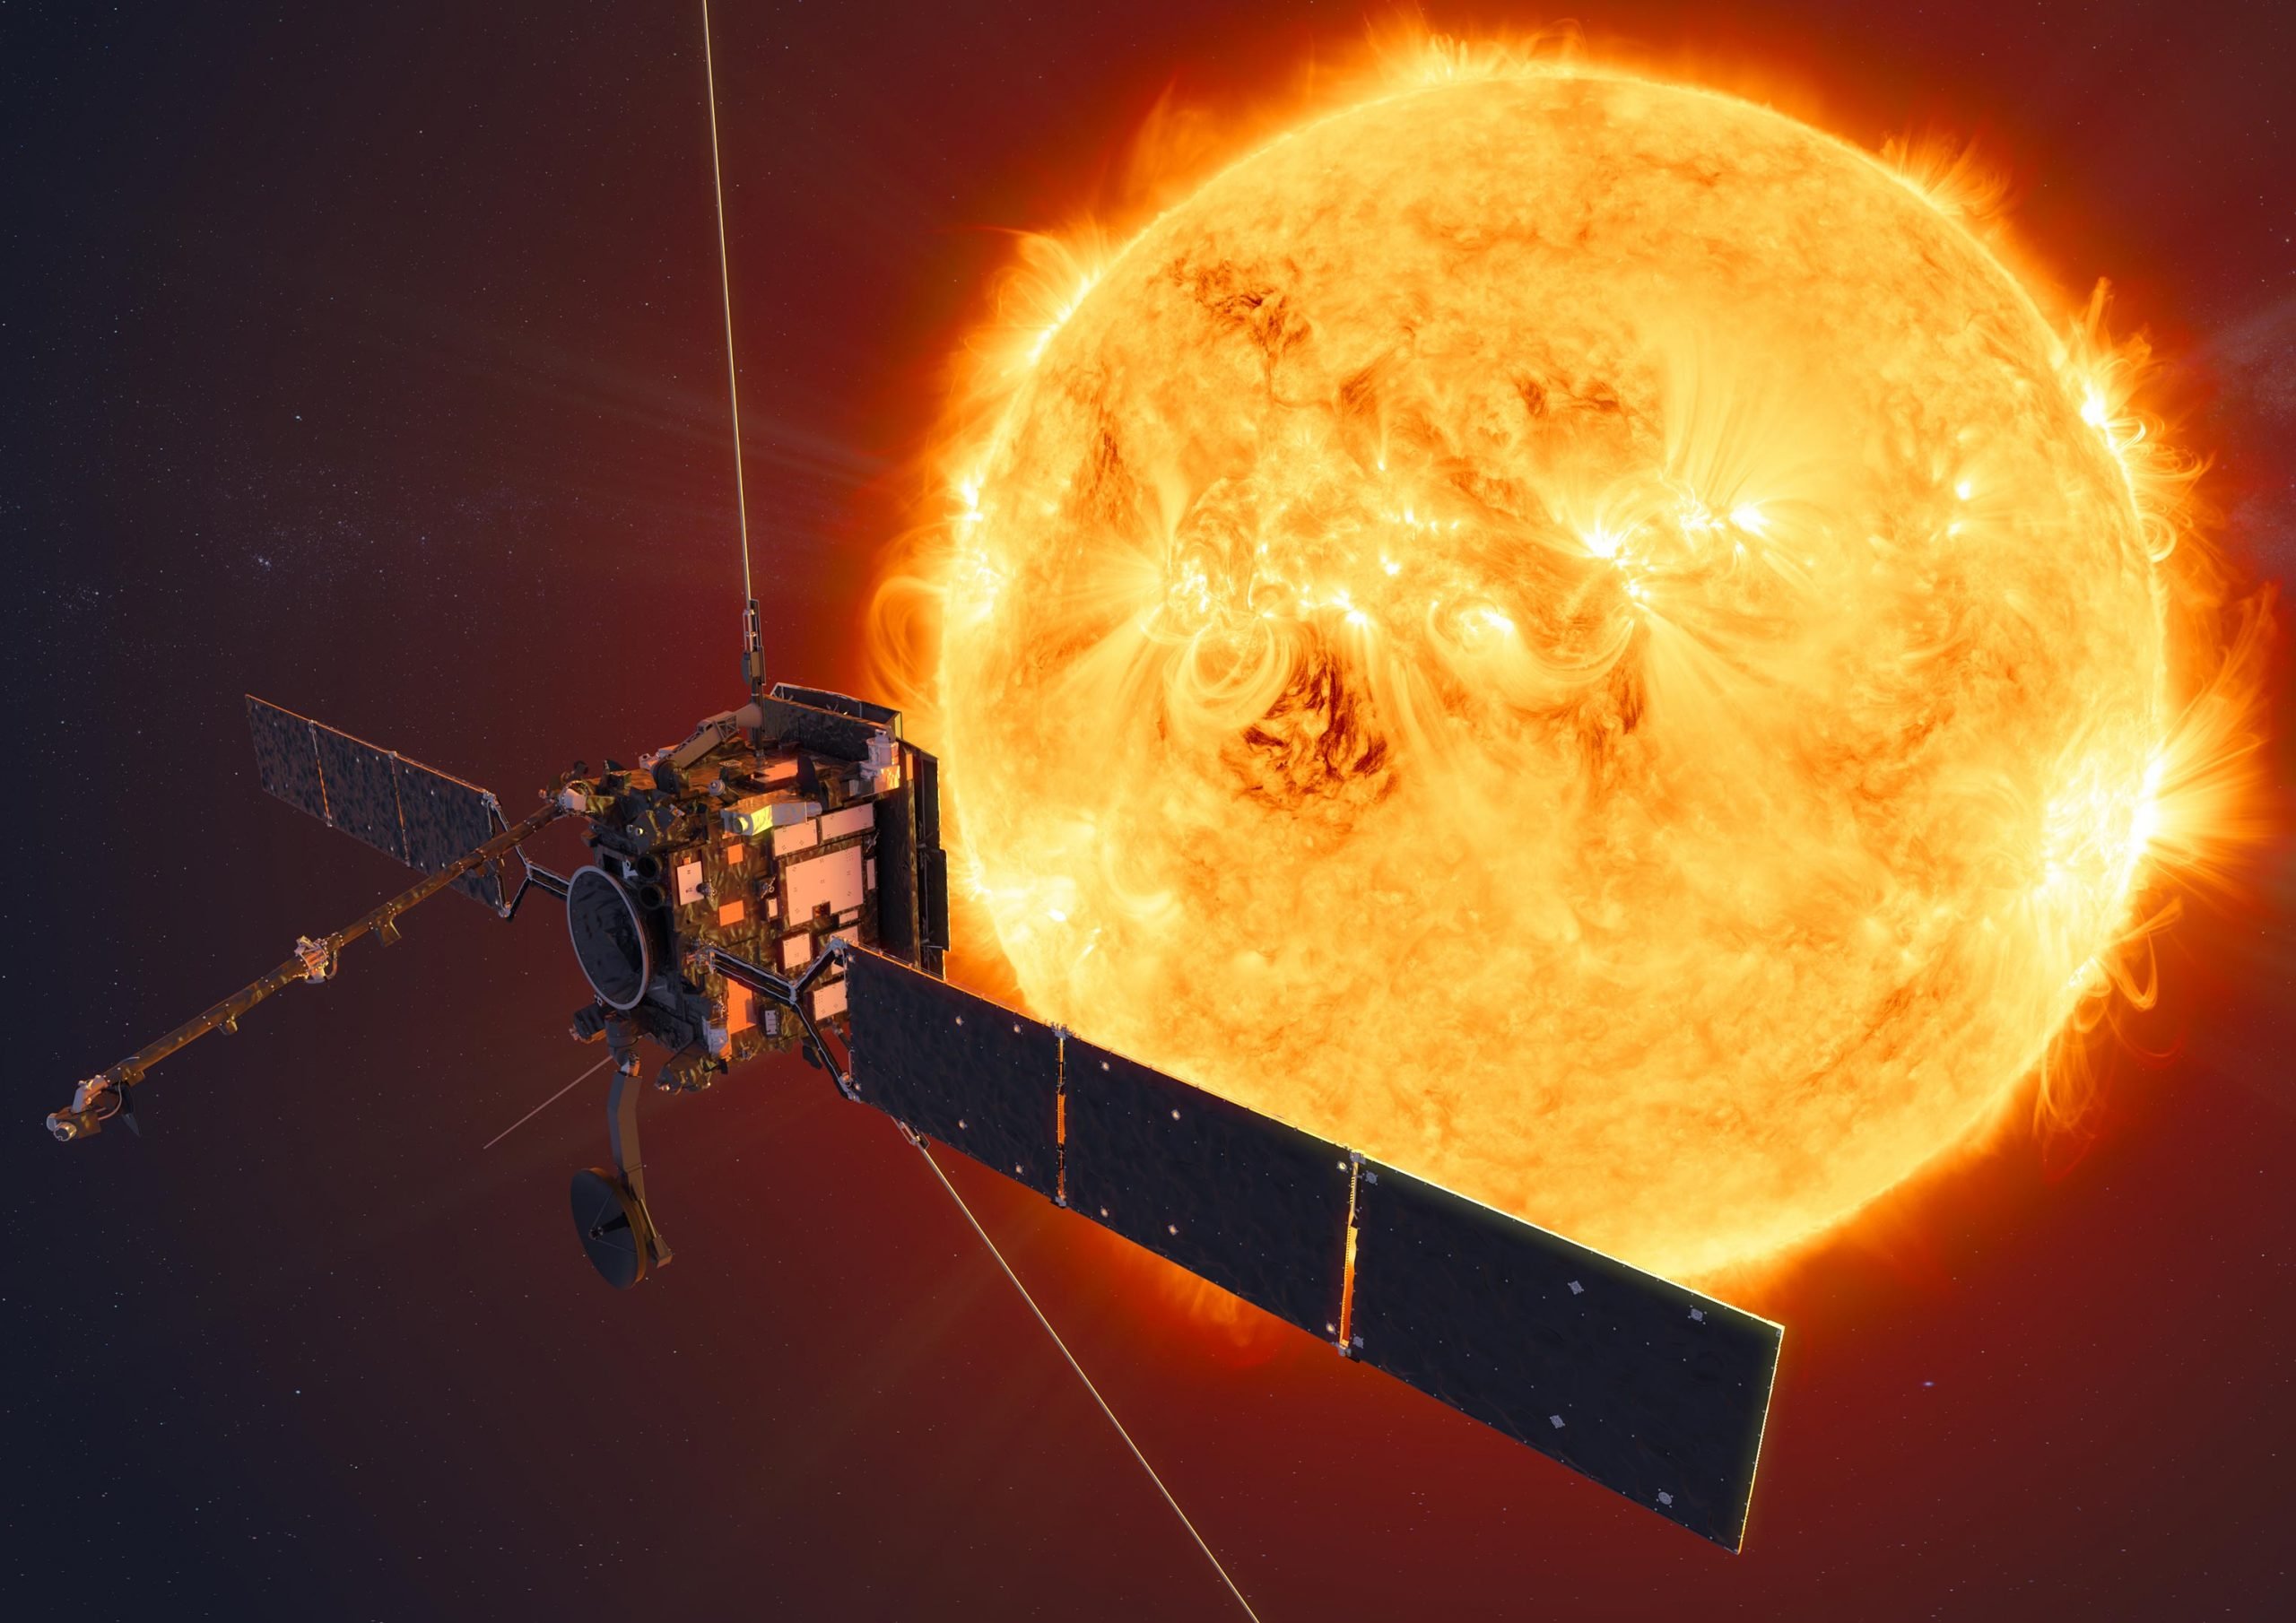 The orbiting solar module captures the Sun’s delicate corona in stunning detail [Video]